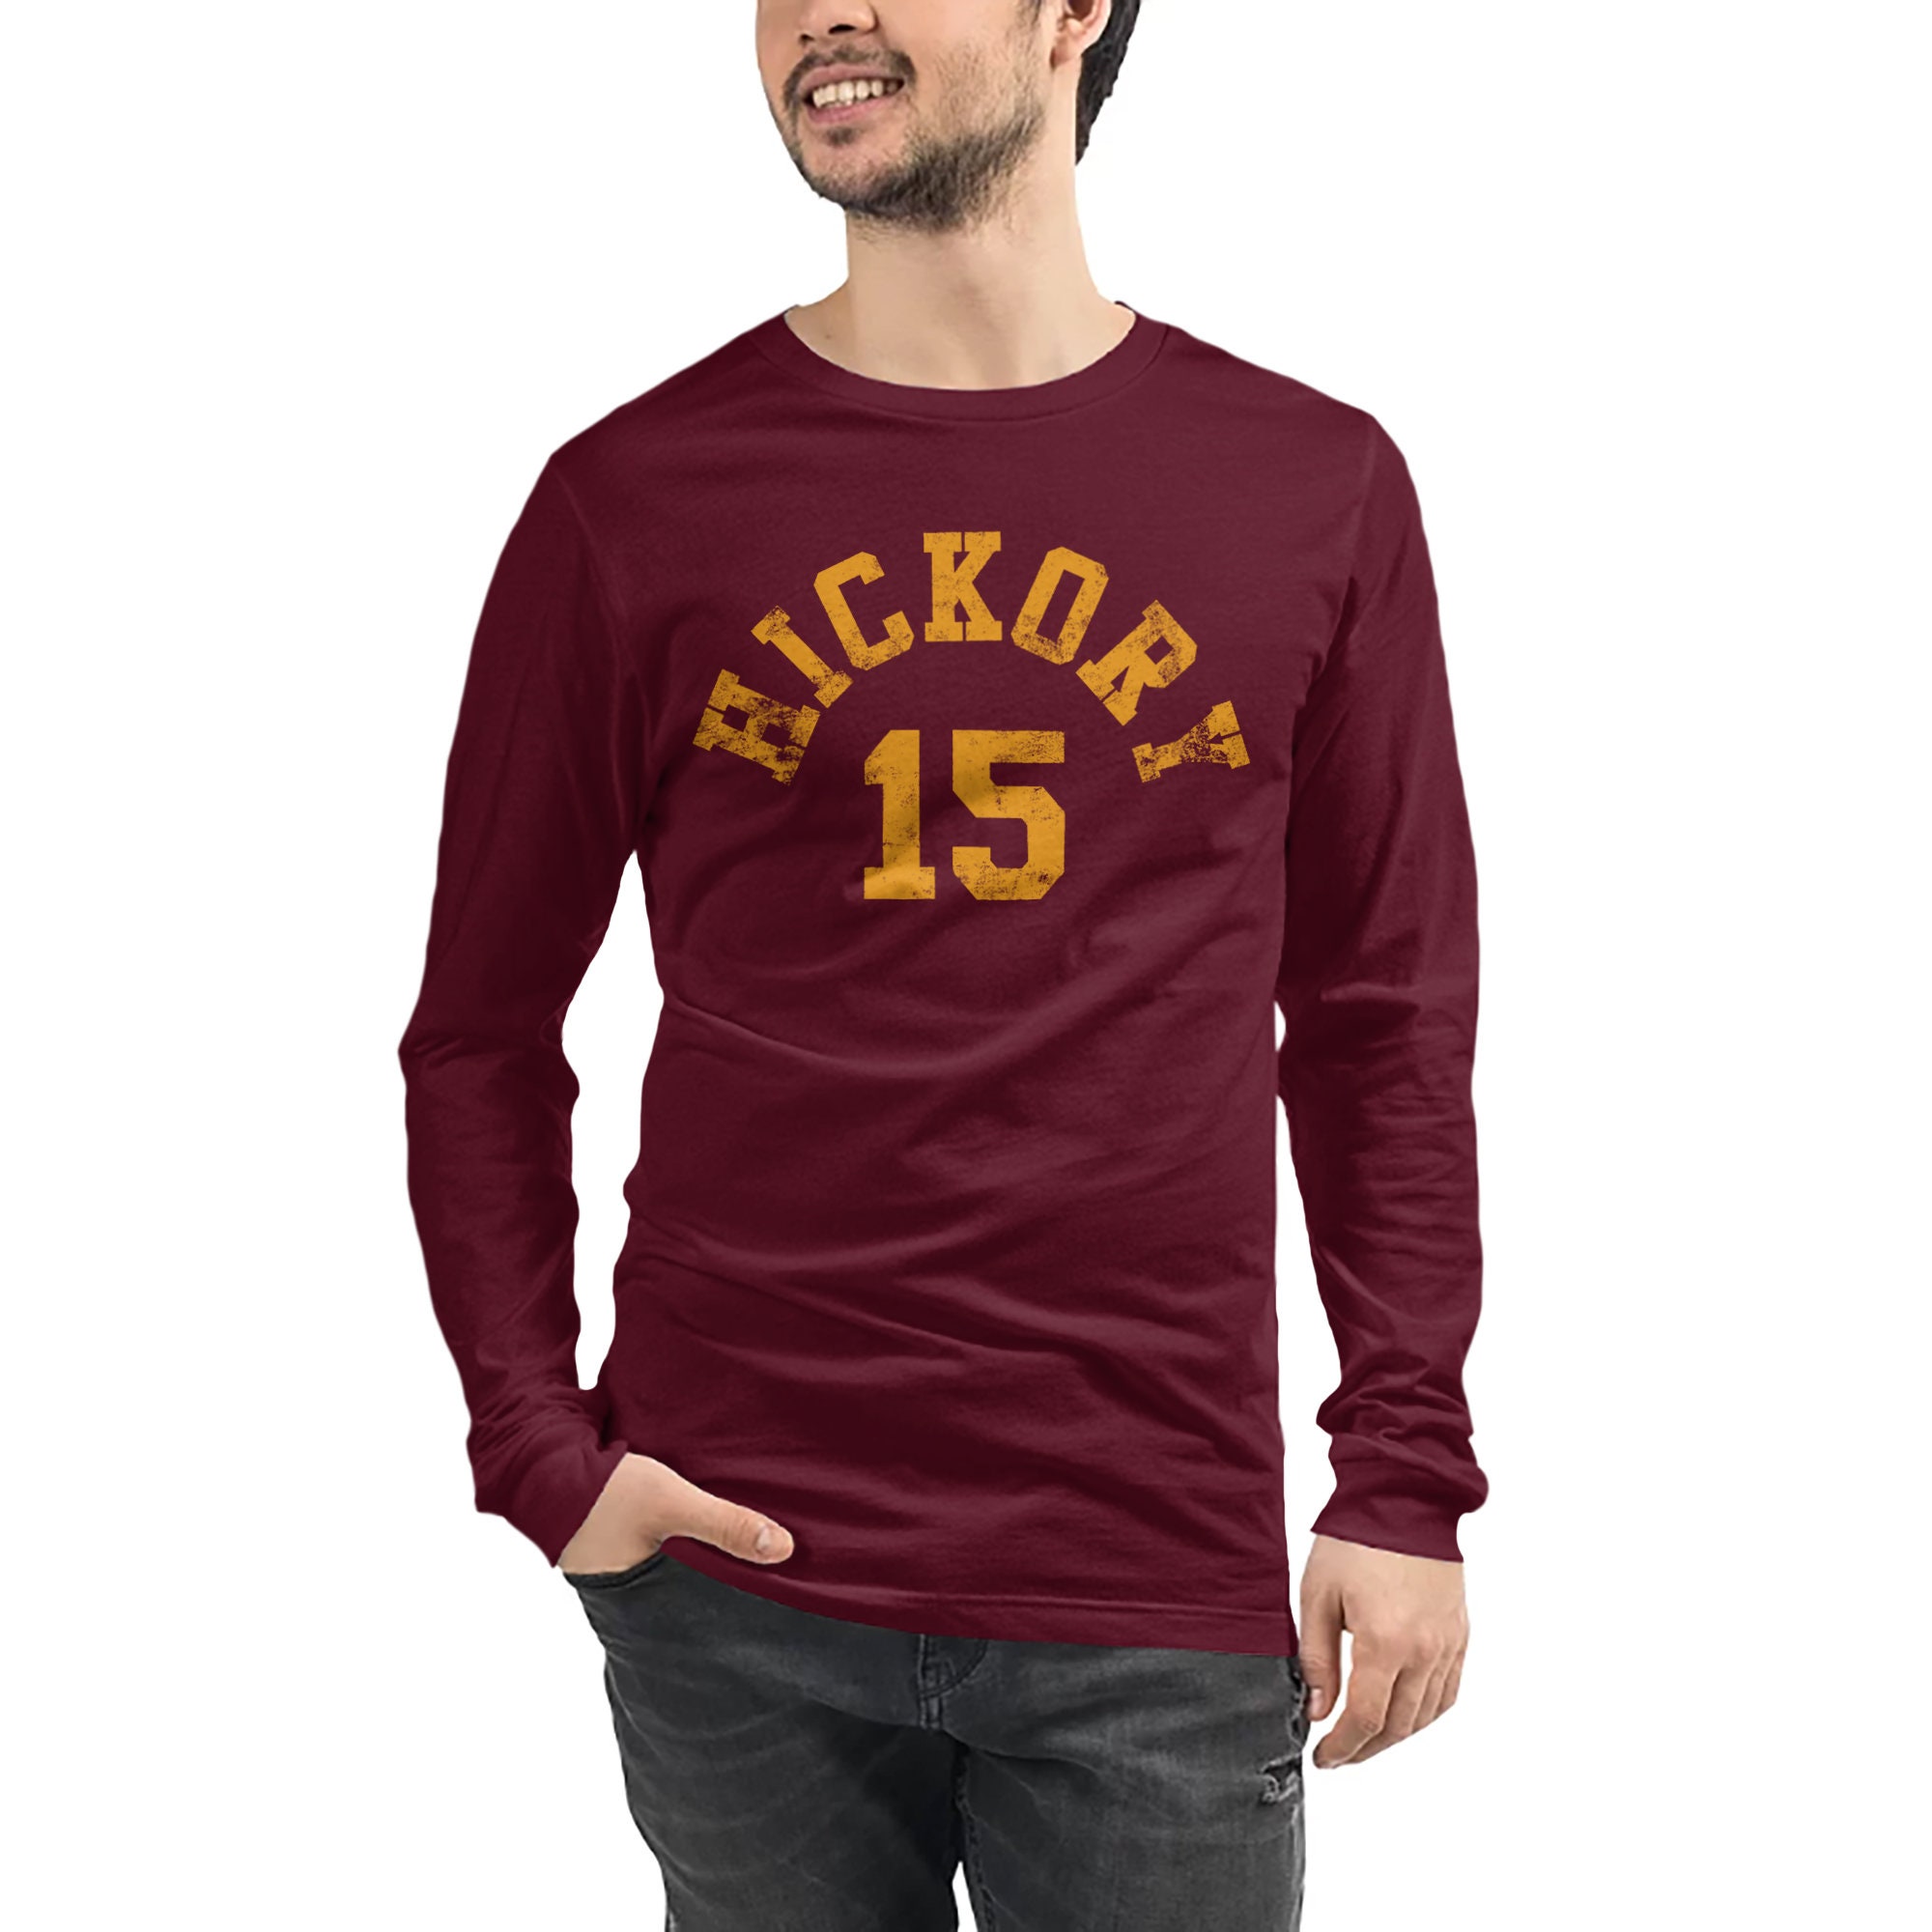 Hoosiers Jimmy Chitwood Hickory Jersey | Essential T-Shirt